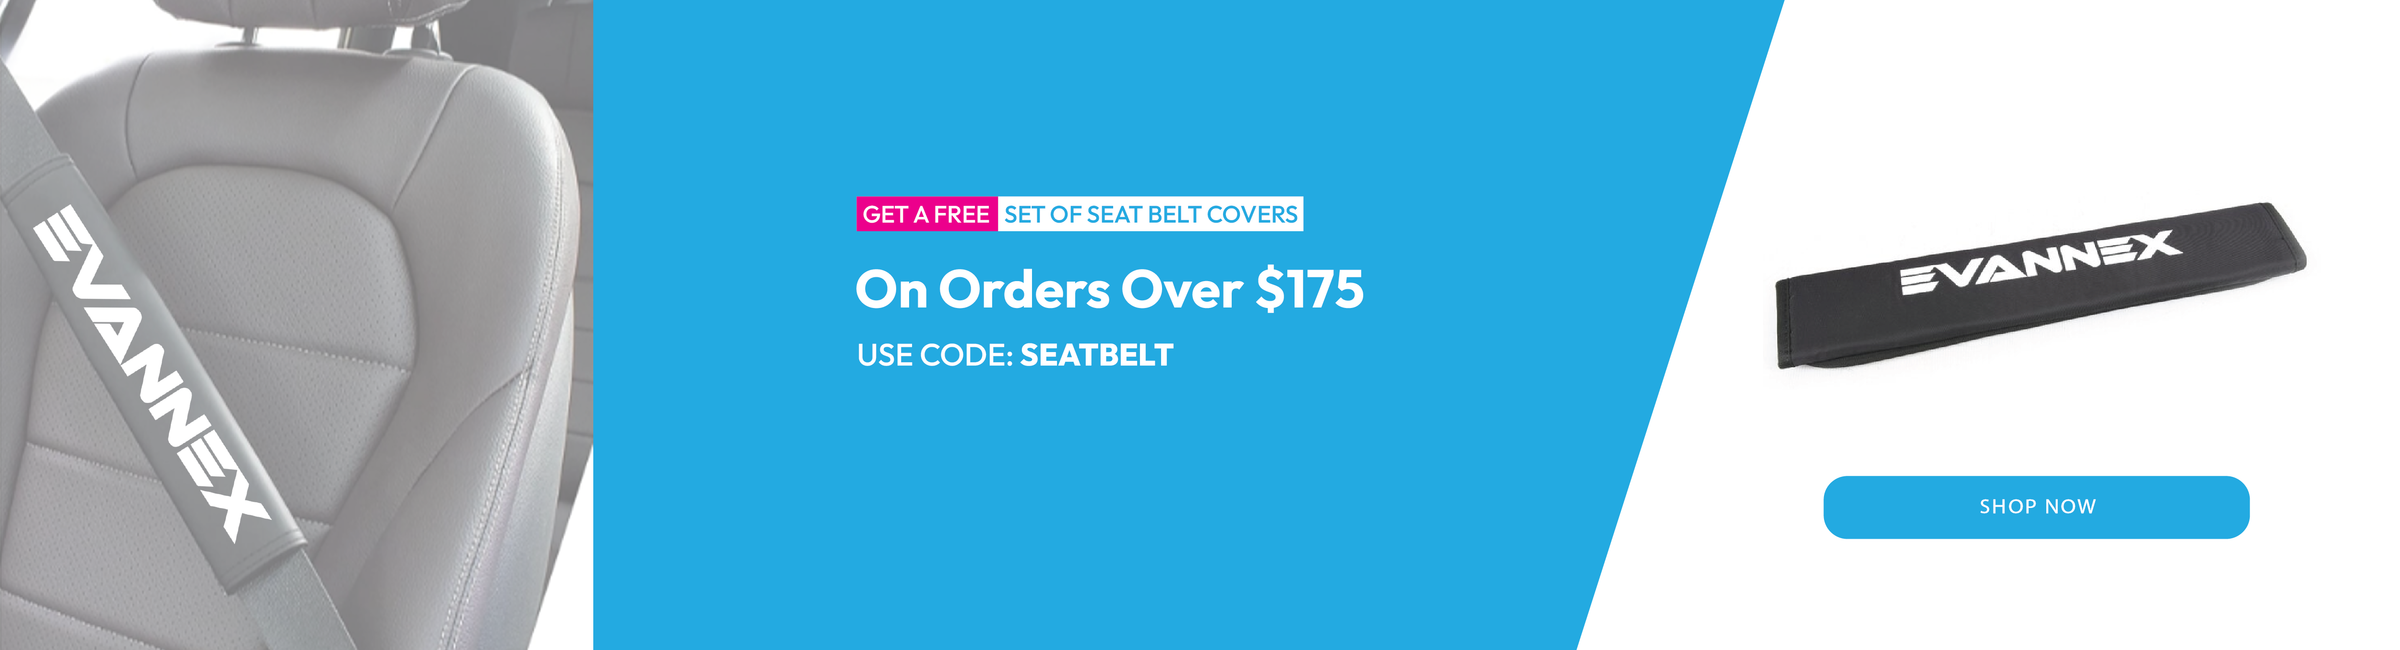 FREE SEAT BELT COVER ON ORDERS OVER $175